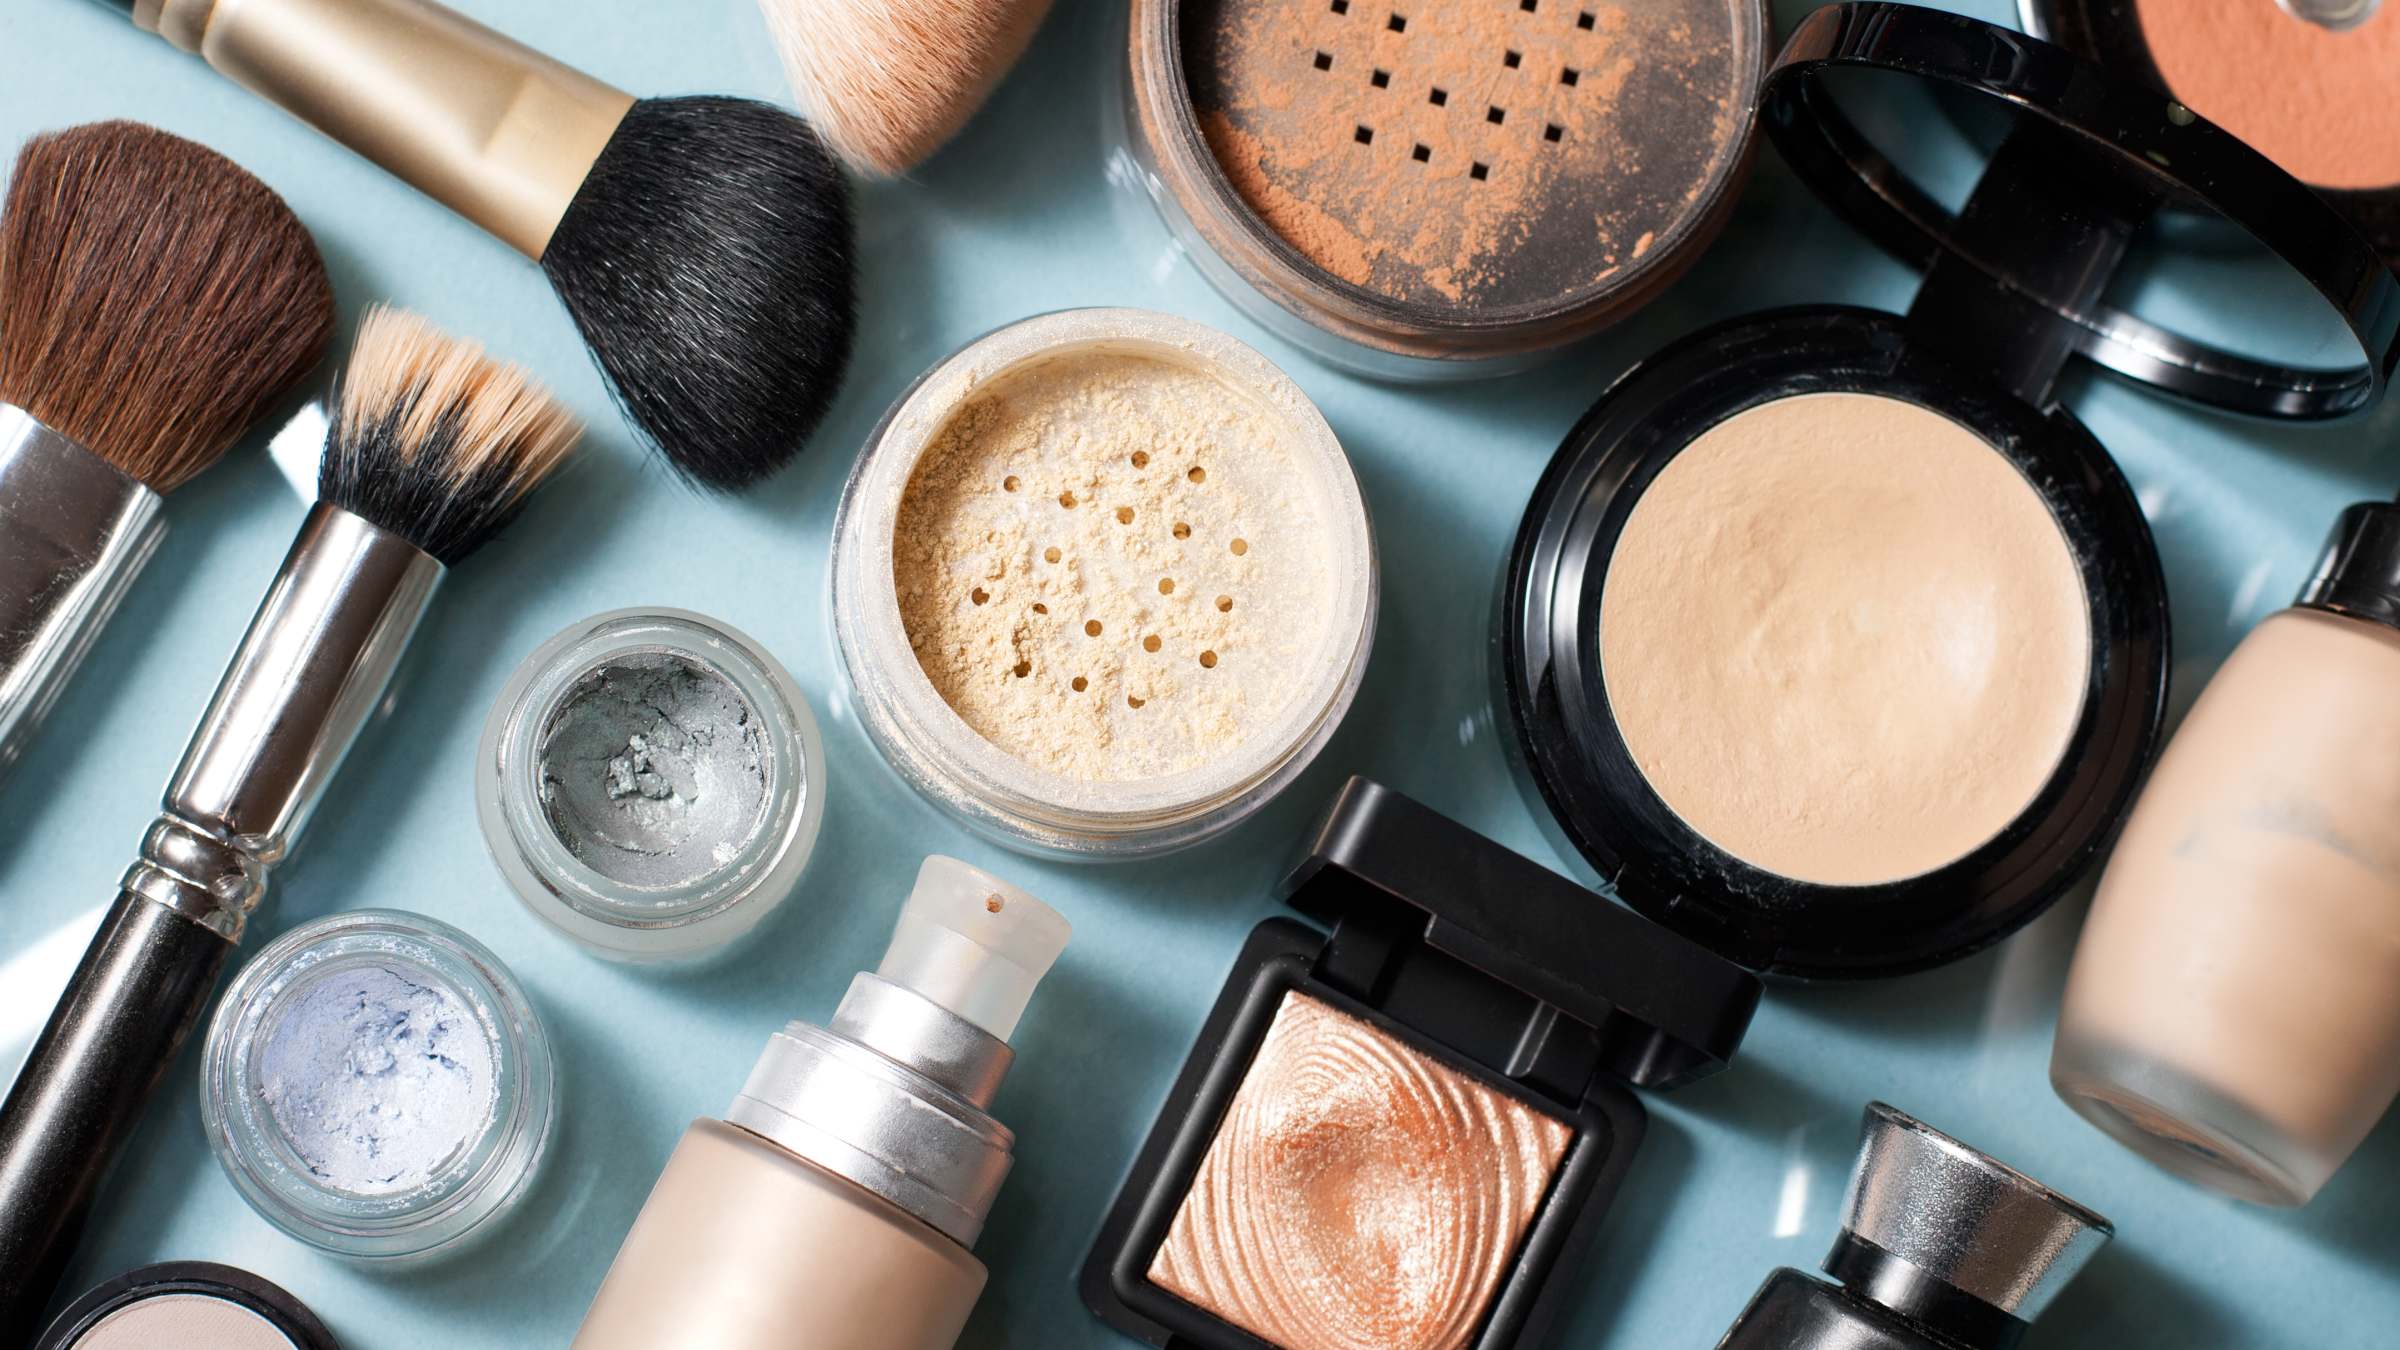 Can you use expired makeup? | State Health